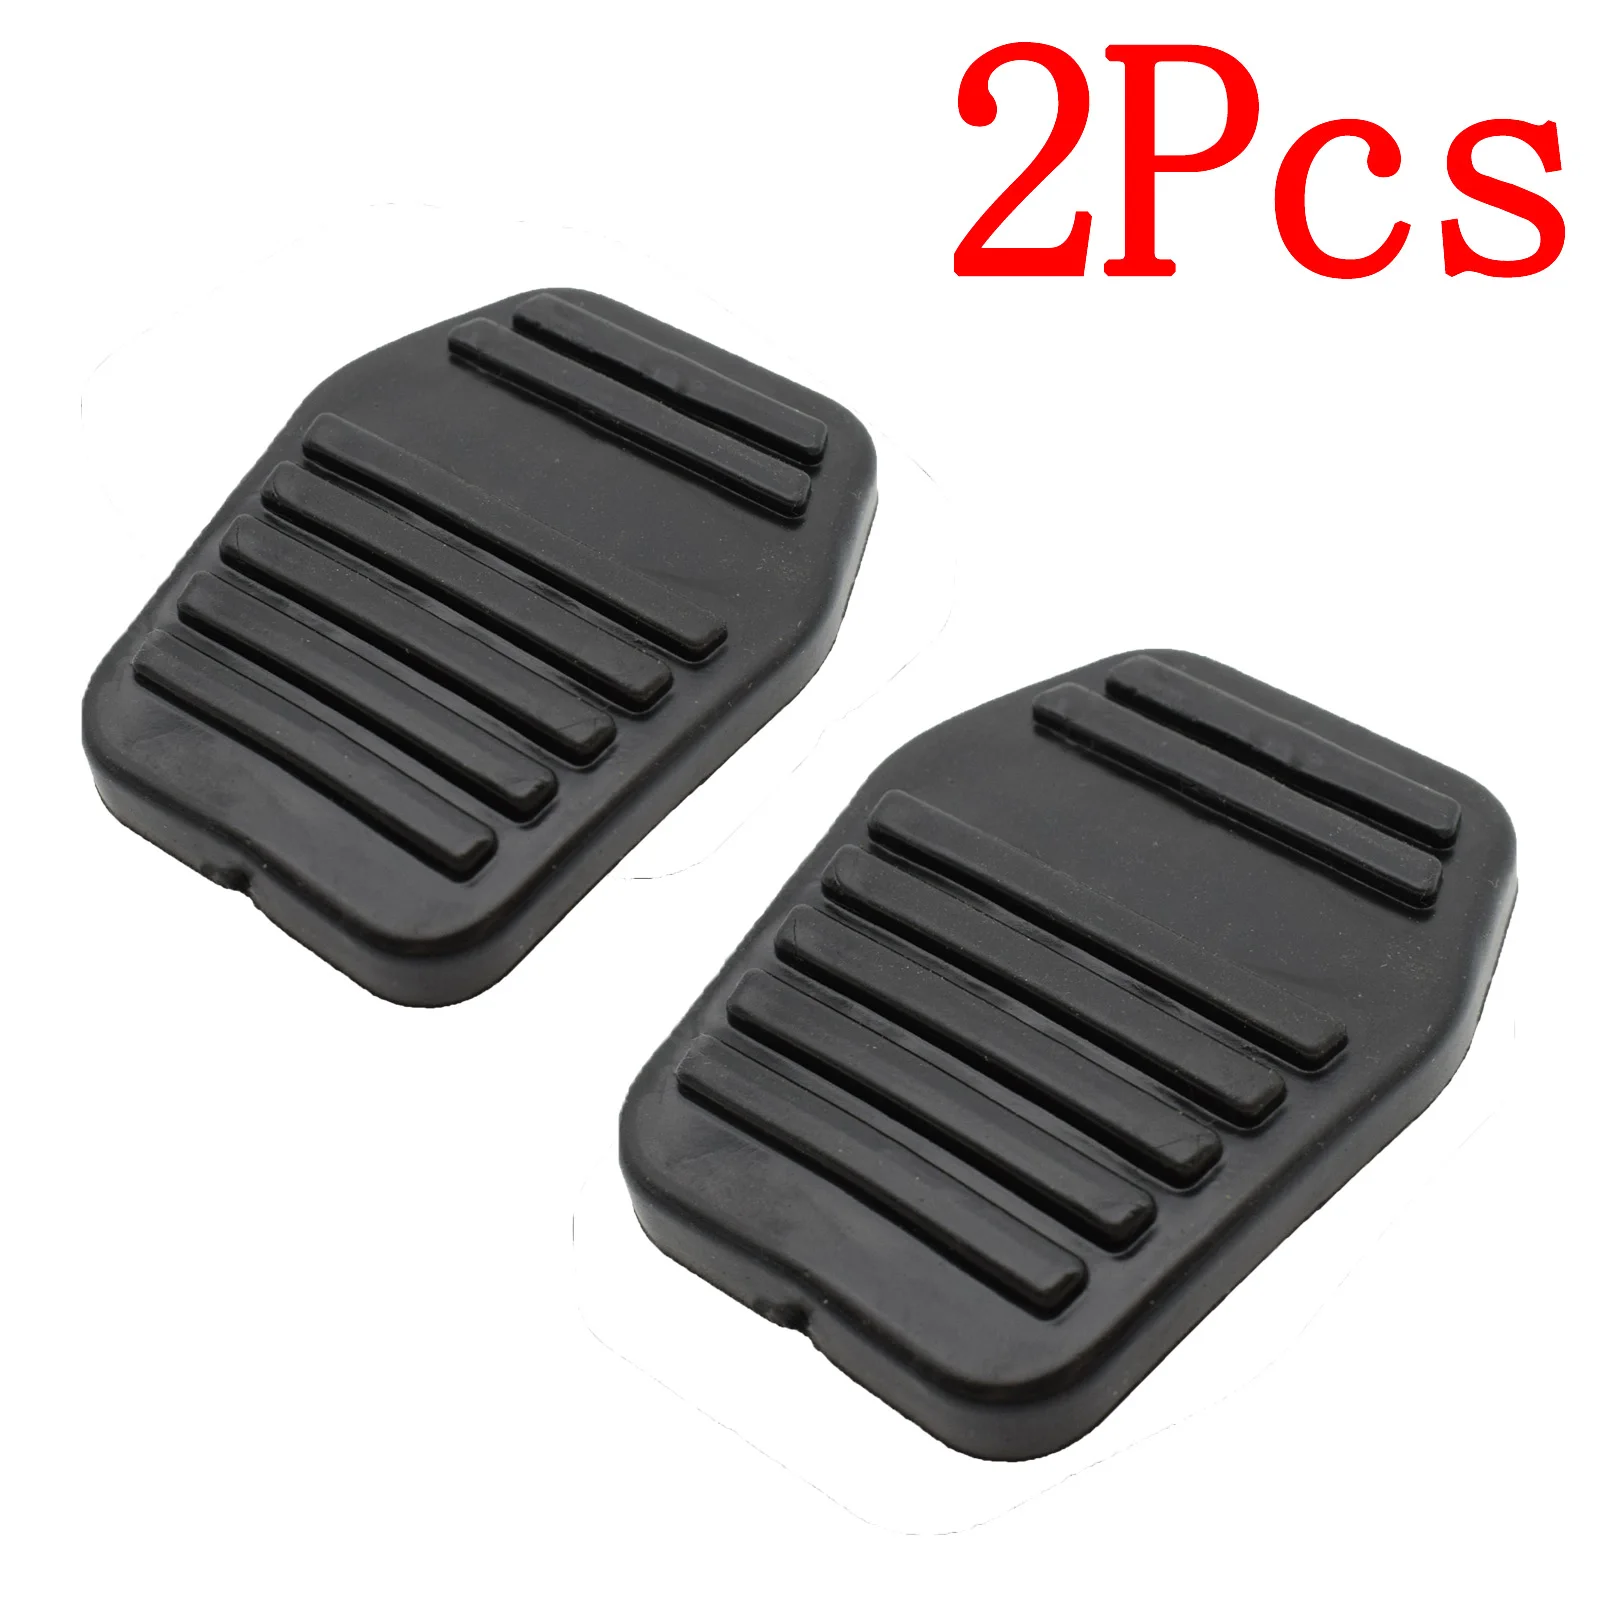 2Pcs Auto Car Brake Clutch Skid-proof Pedal Cover Pad Covers For Ford Transit - £10.87 GBP